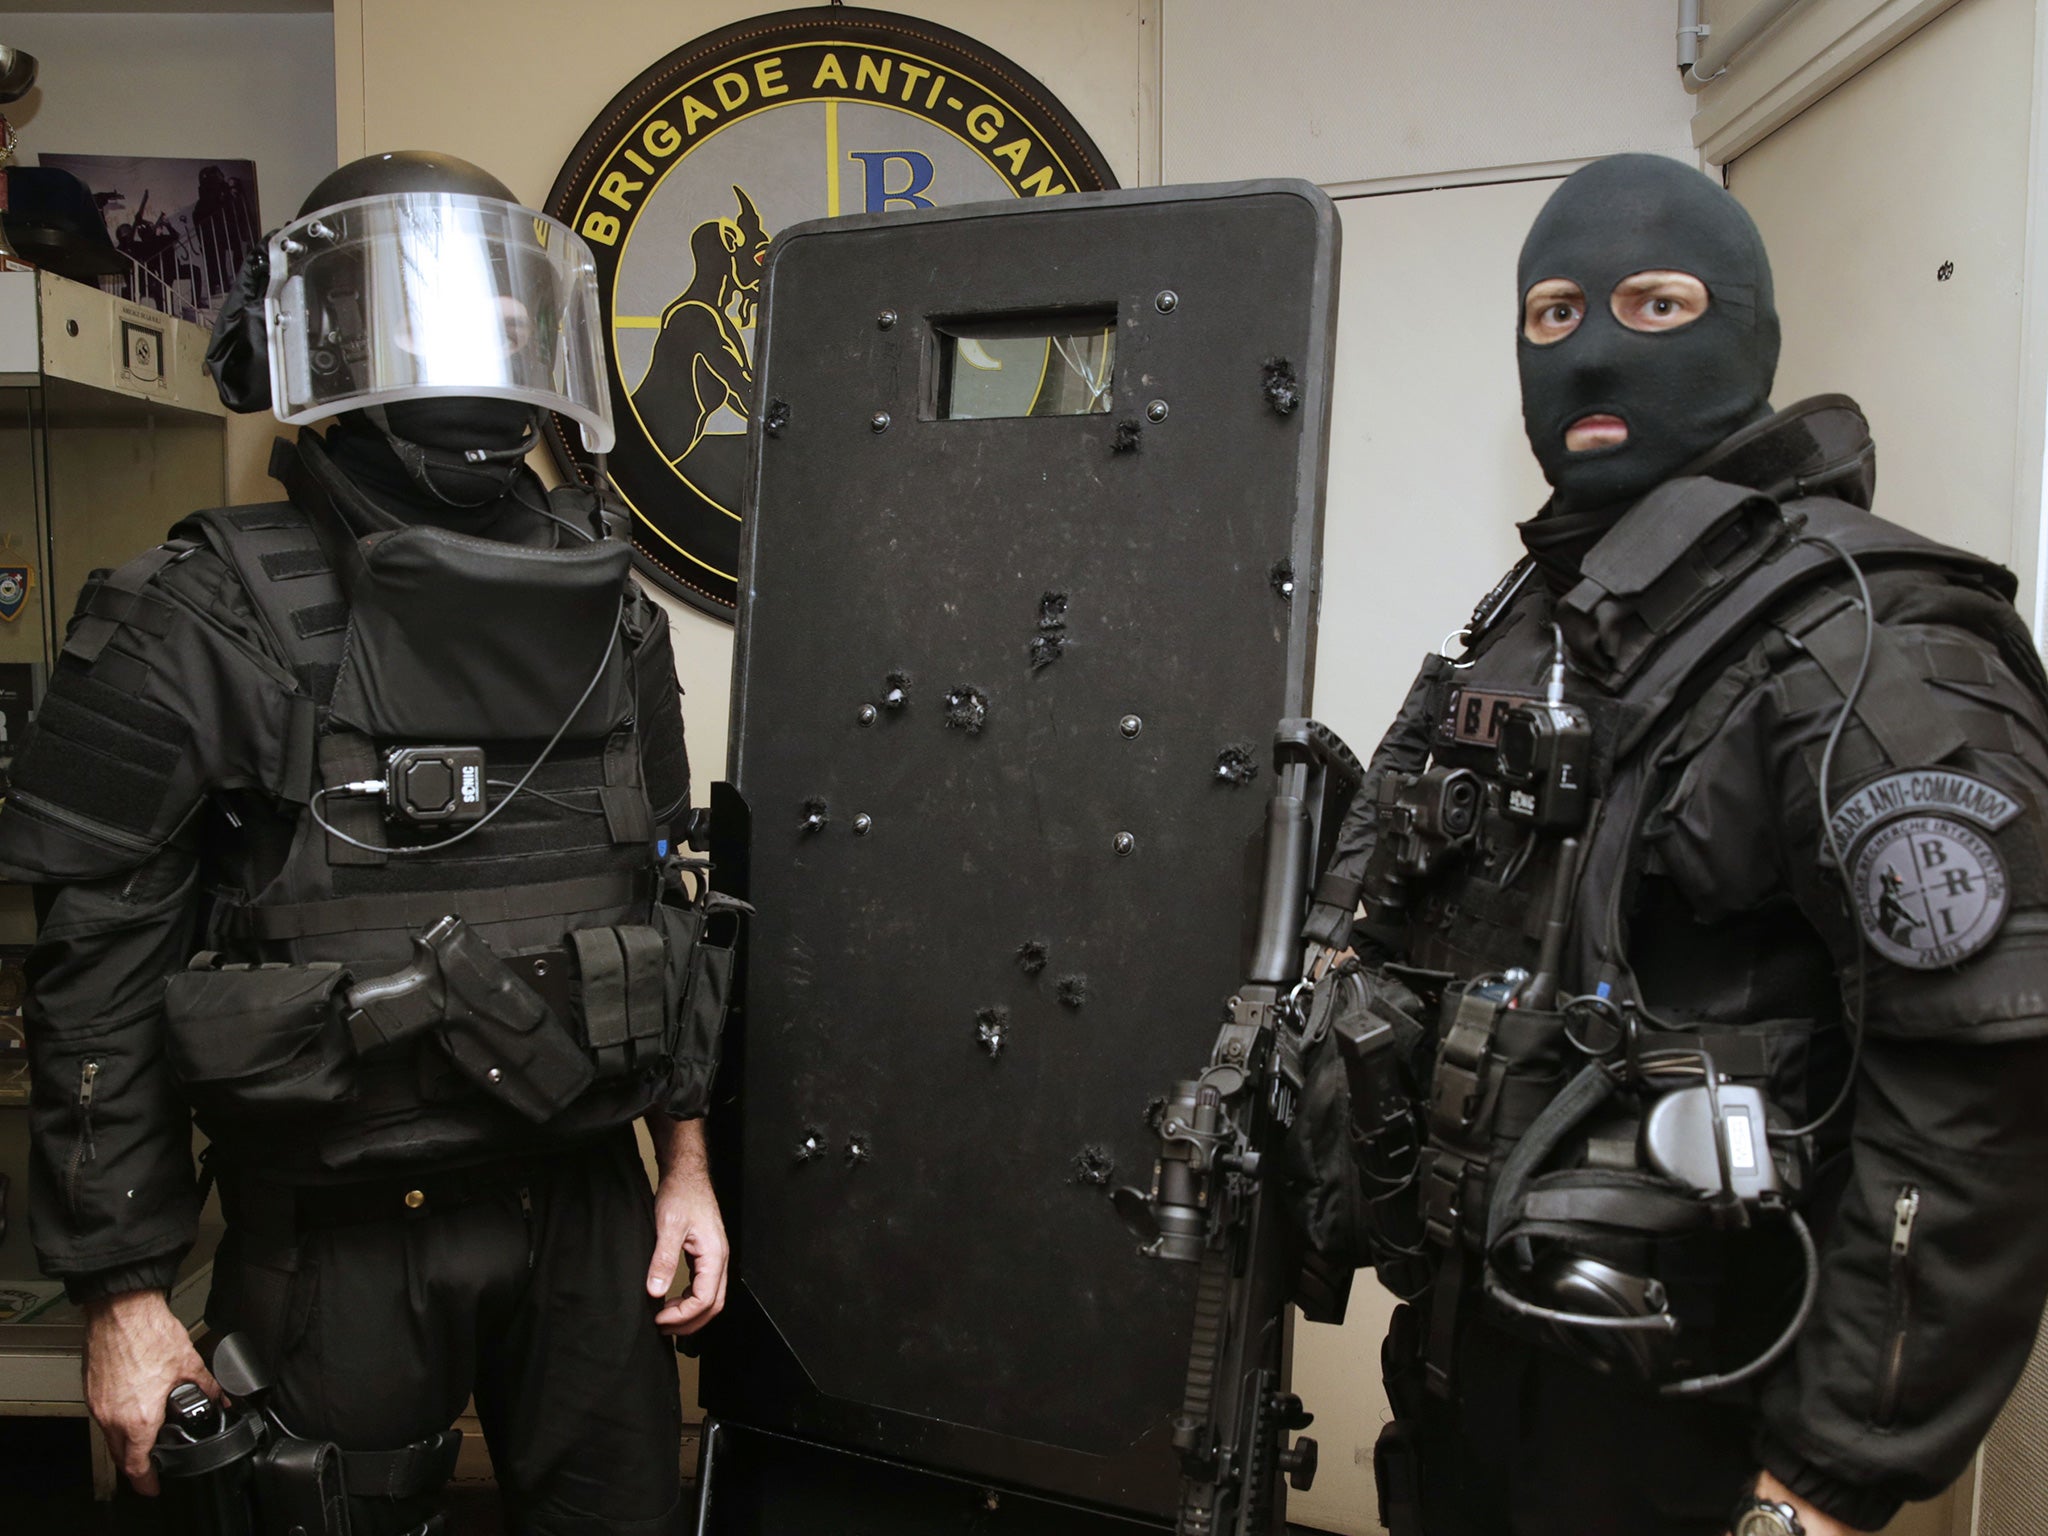 Police commandos pose with a bullet-riddled riot shield, used in the assault